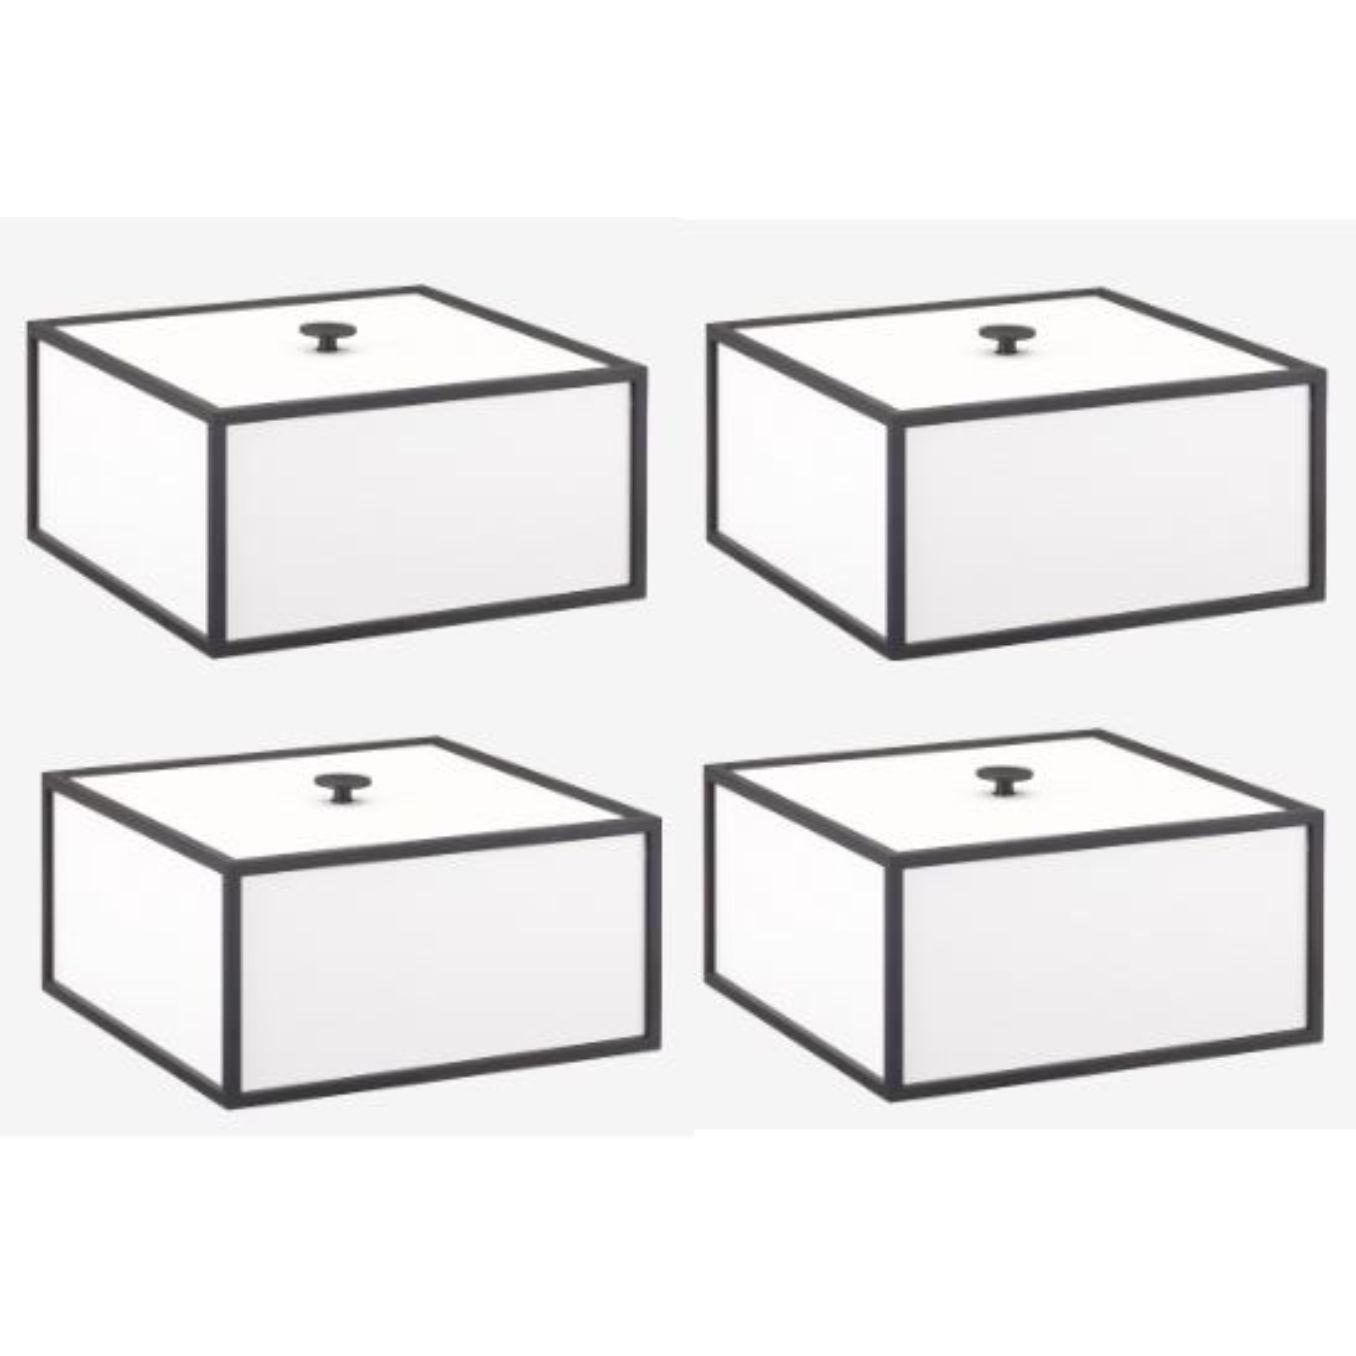 Set of 4 white frame 20 box by Lassen
Dimensions: d 20 x w 20 x h 10 cm 
Materials: Melamin, Melamine, Metal, Veneer
Weight: 2.00 Kg

Frame box is a square box in a cubistic shape. The simple boxes are inspired by the Kubus candleholder by